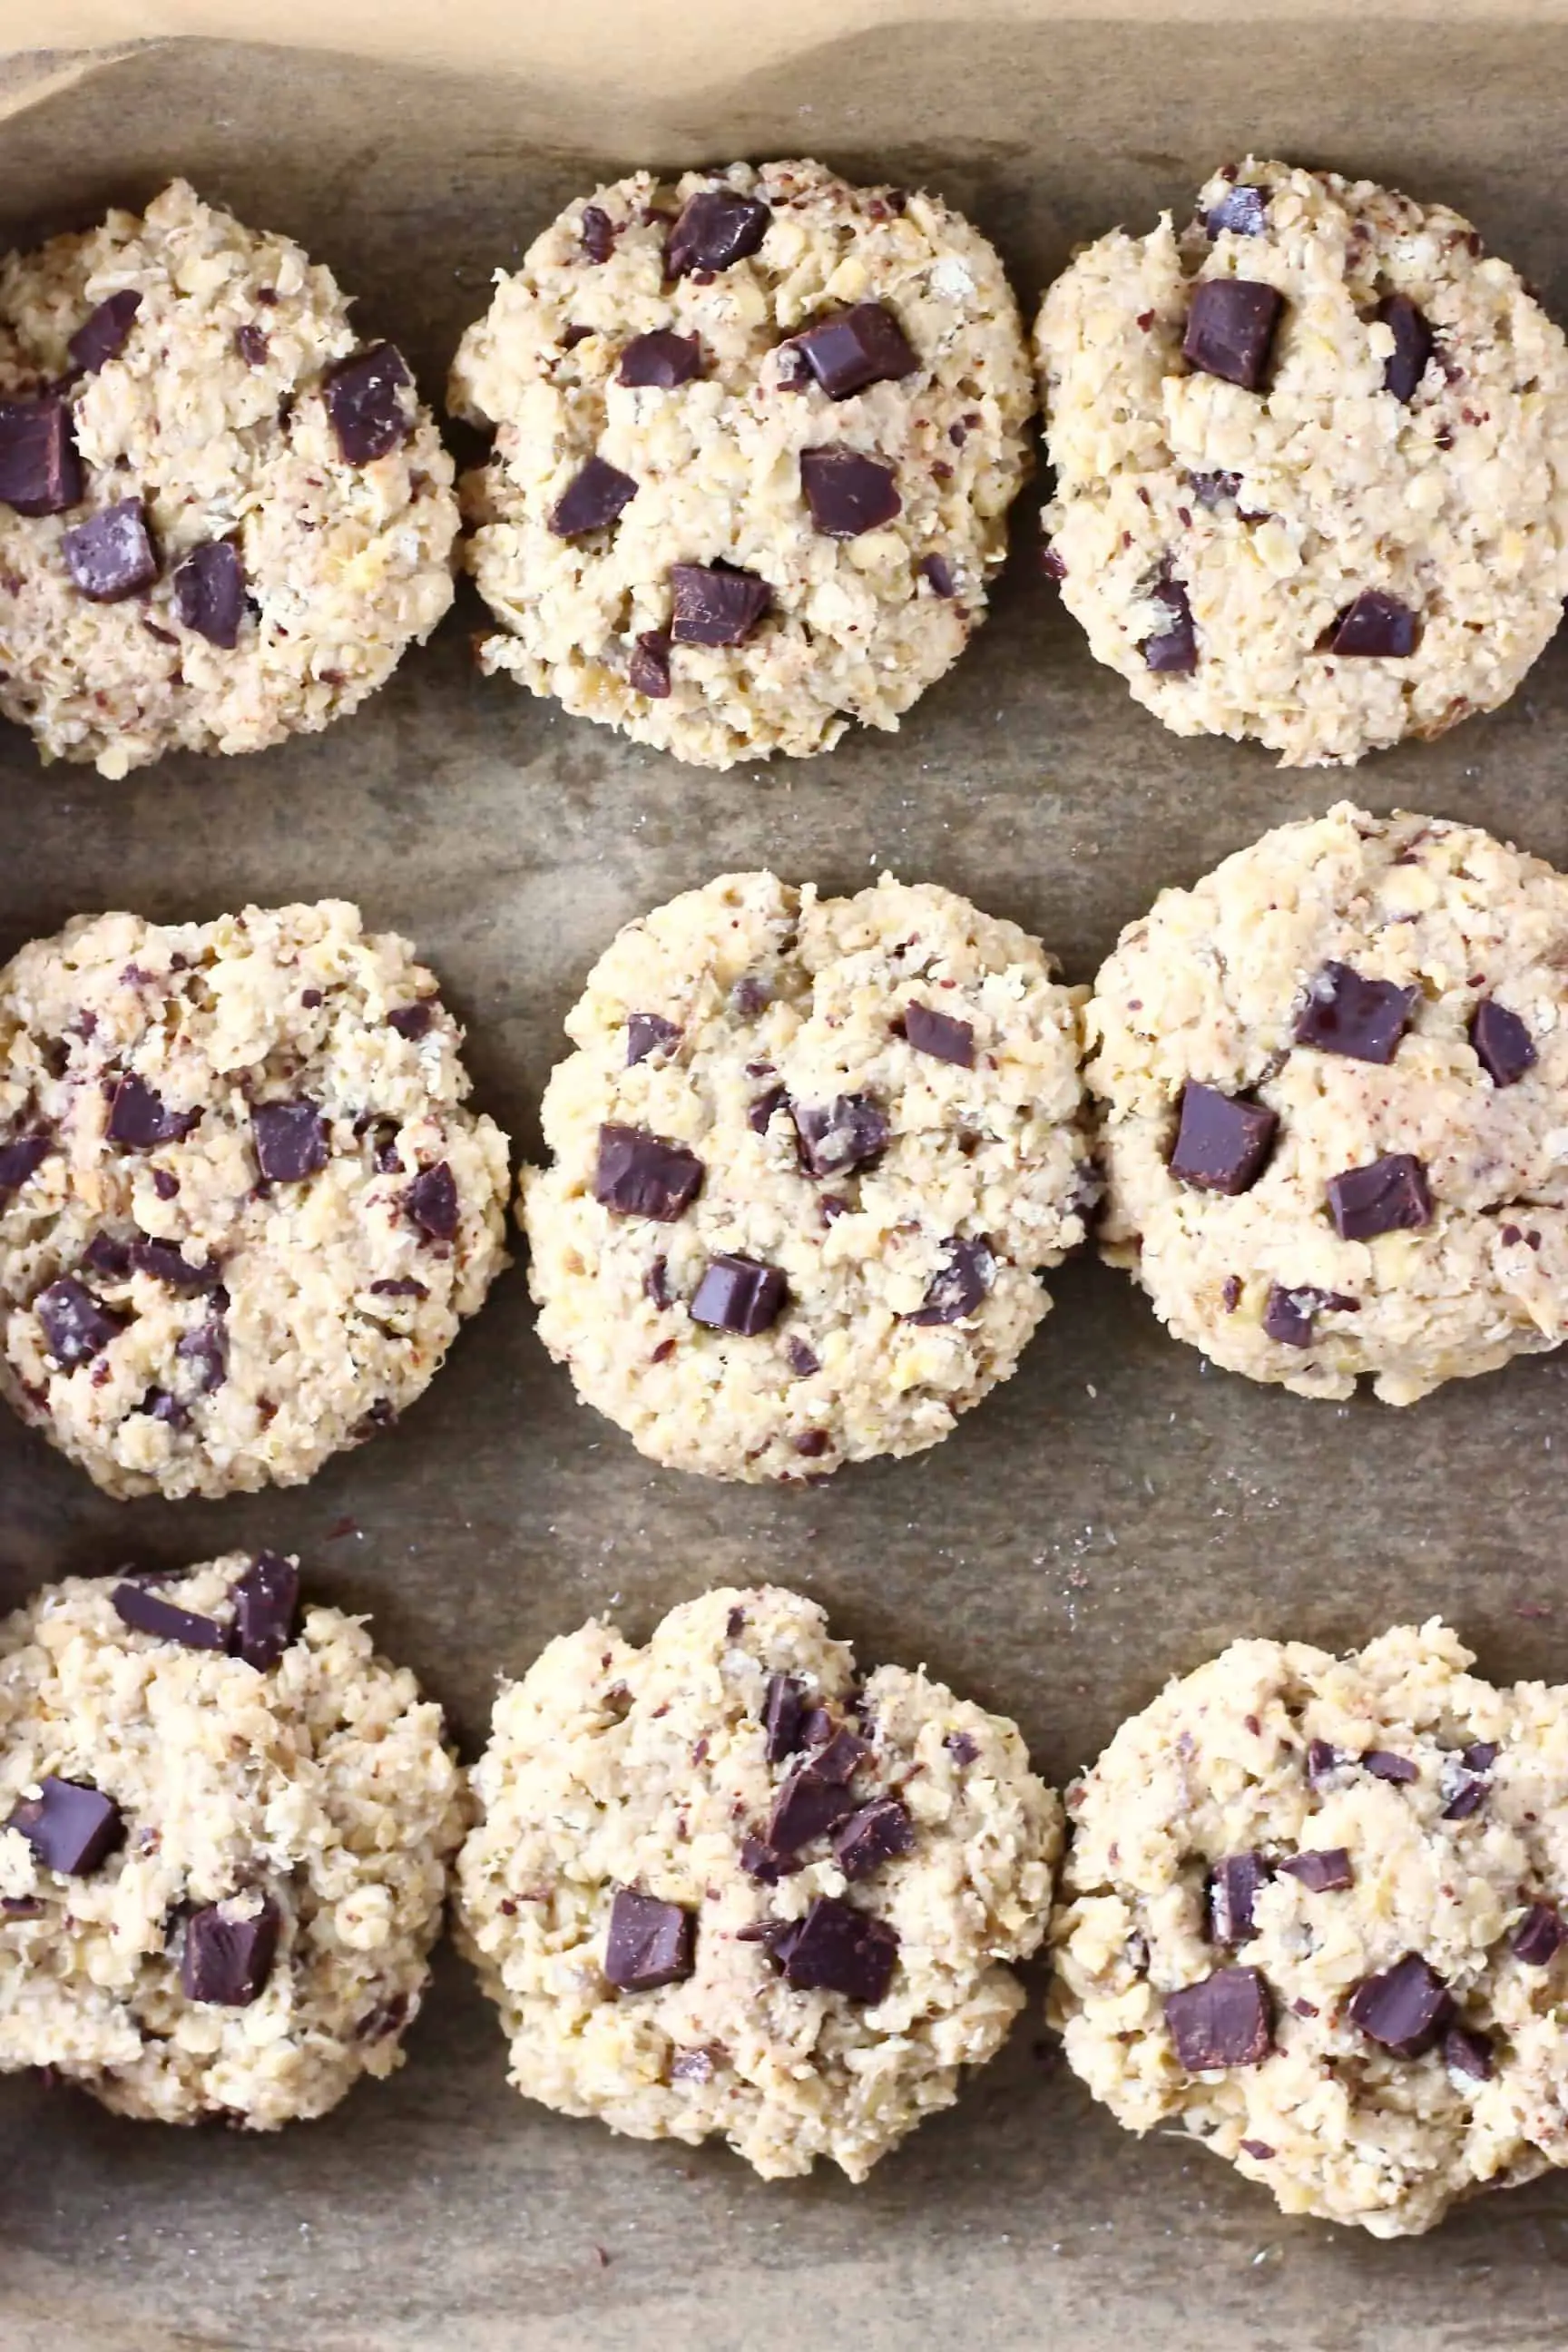 Nine raw gluten-free vegan banana oatmeal cookies with chocolate chips on a baking tray lined with baking paper